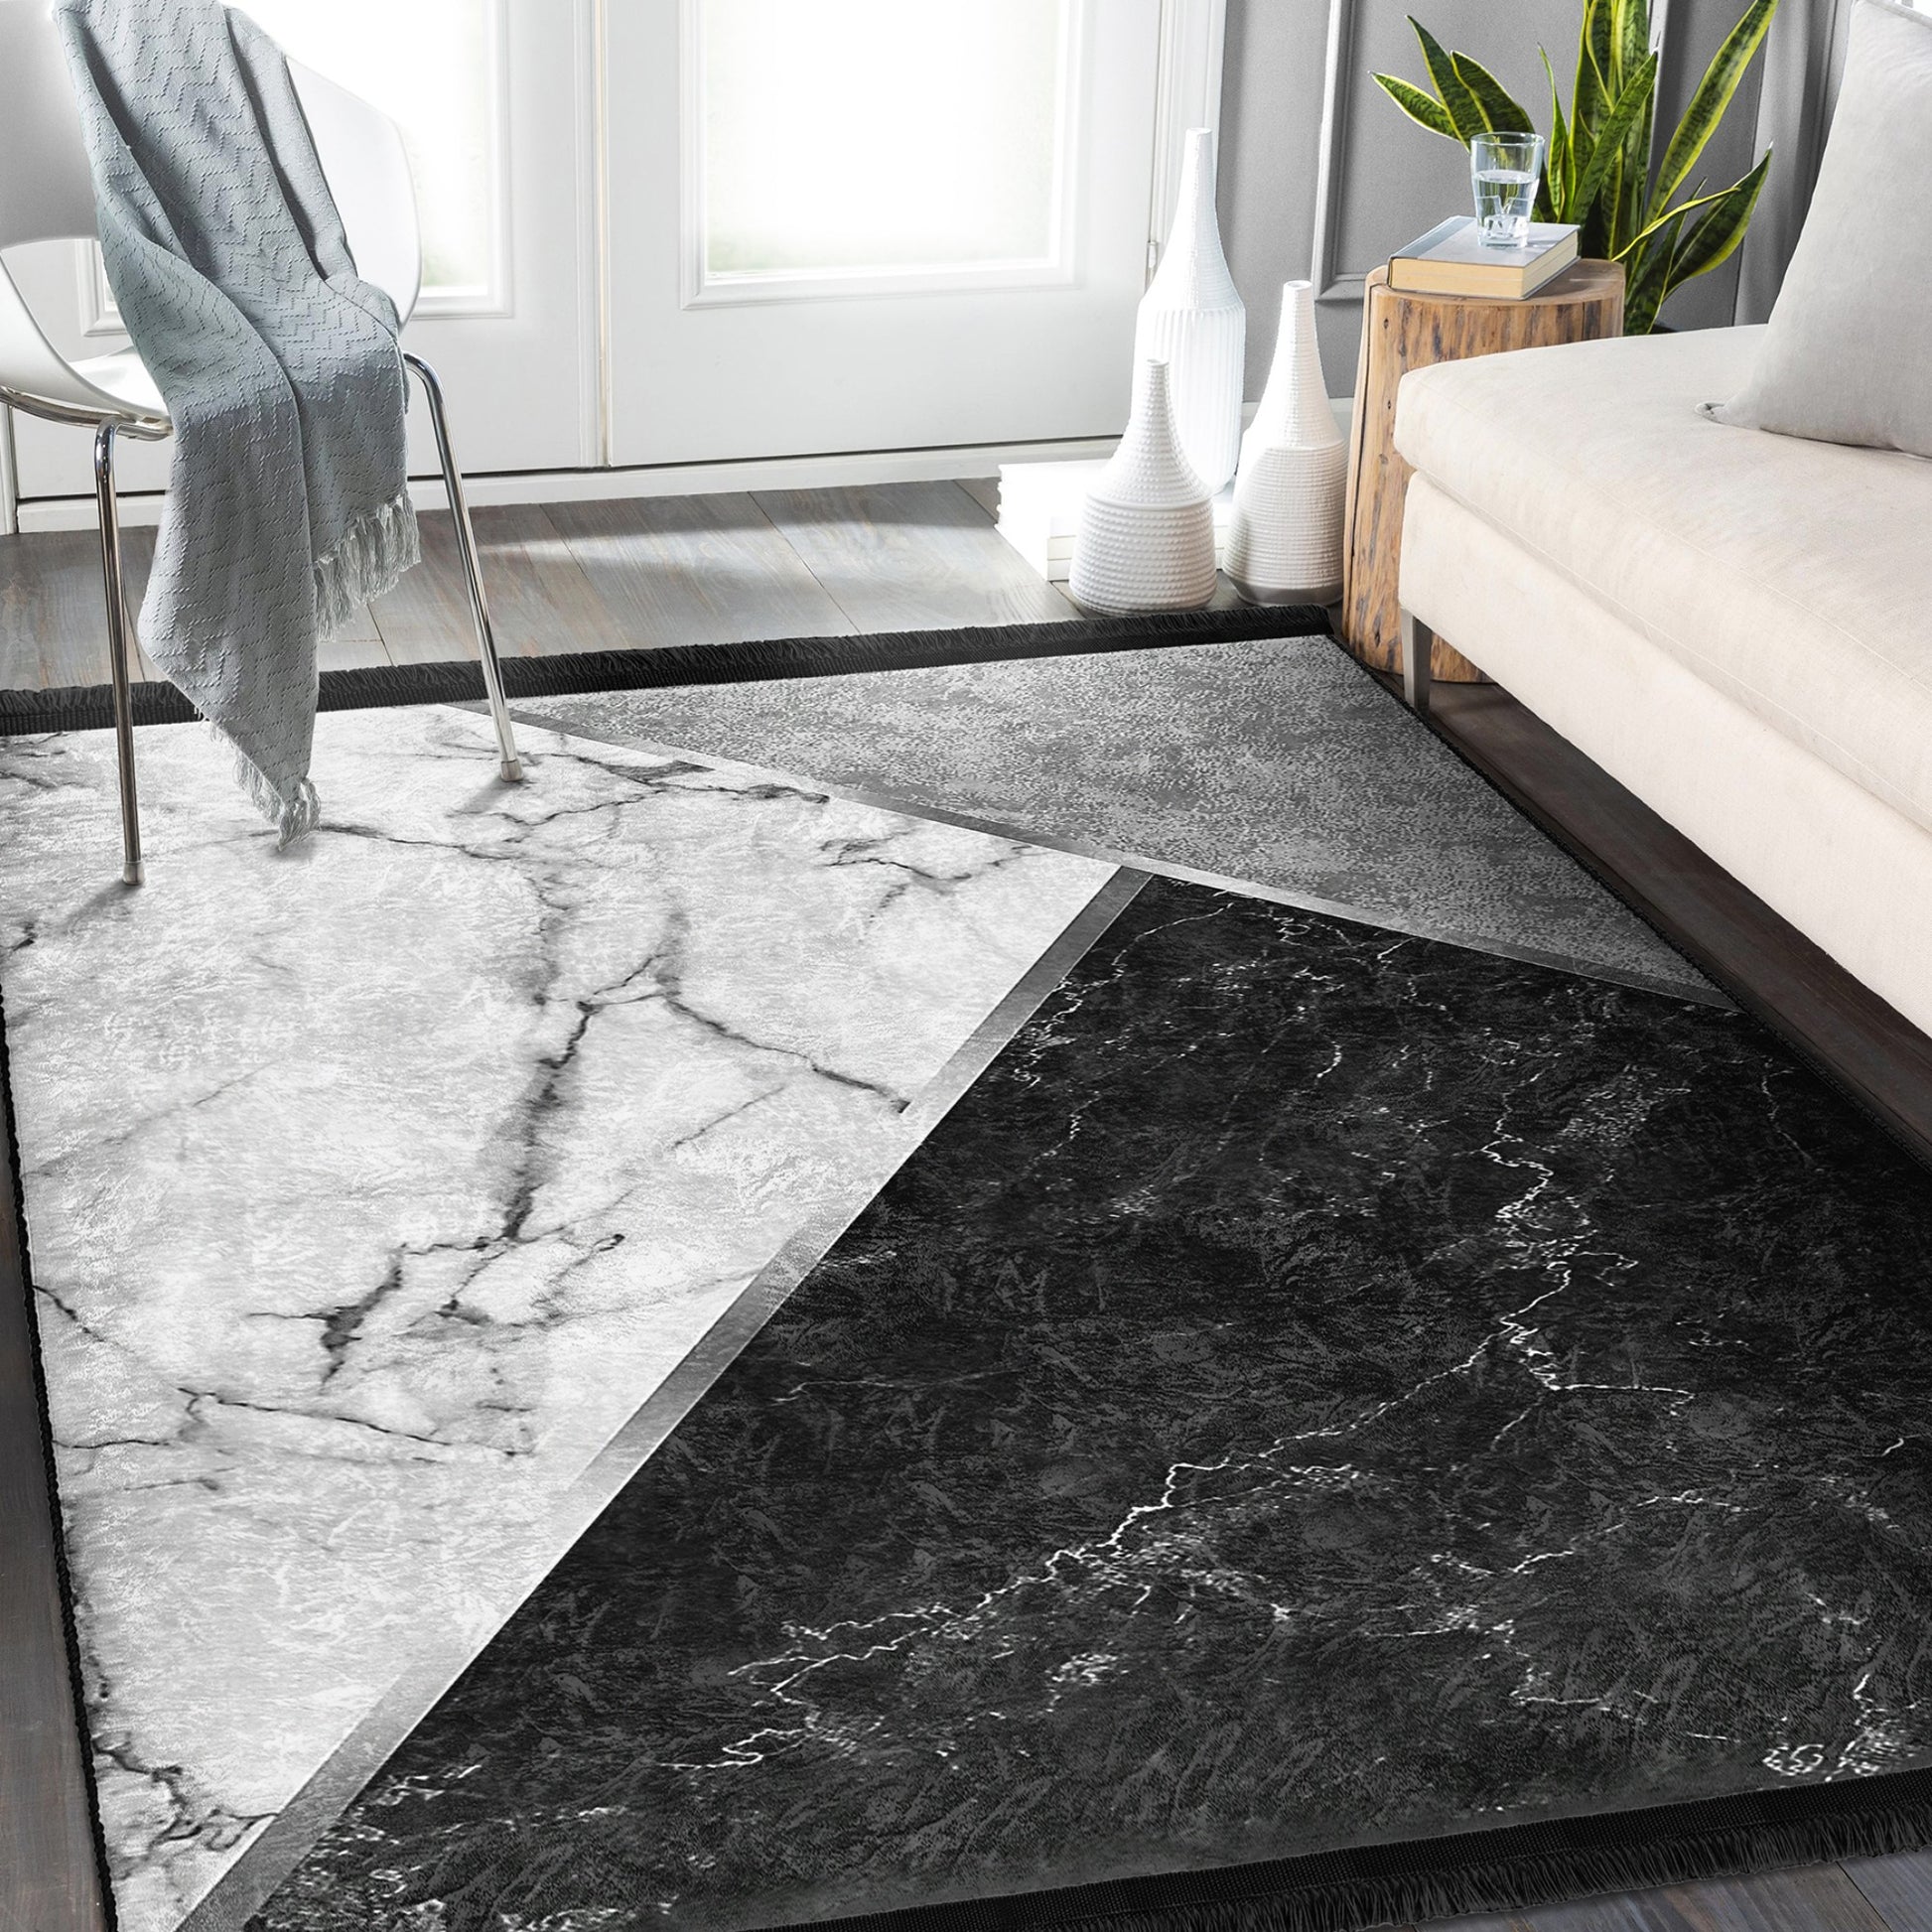 Functional and Stylish Area Rug with Black White Marble Craftsmanship